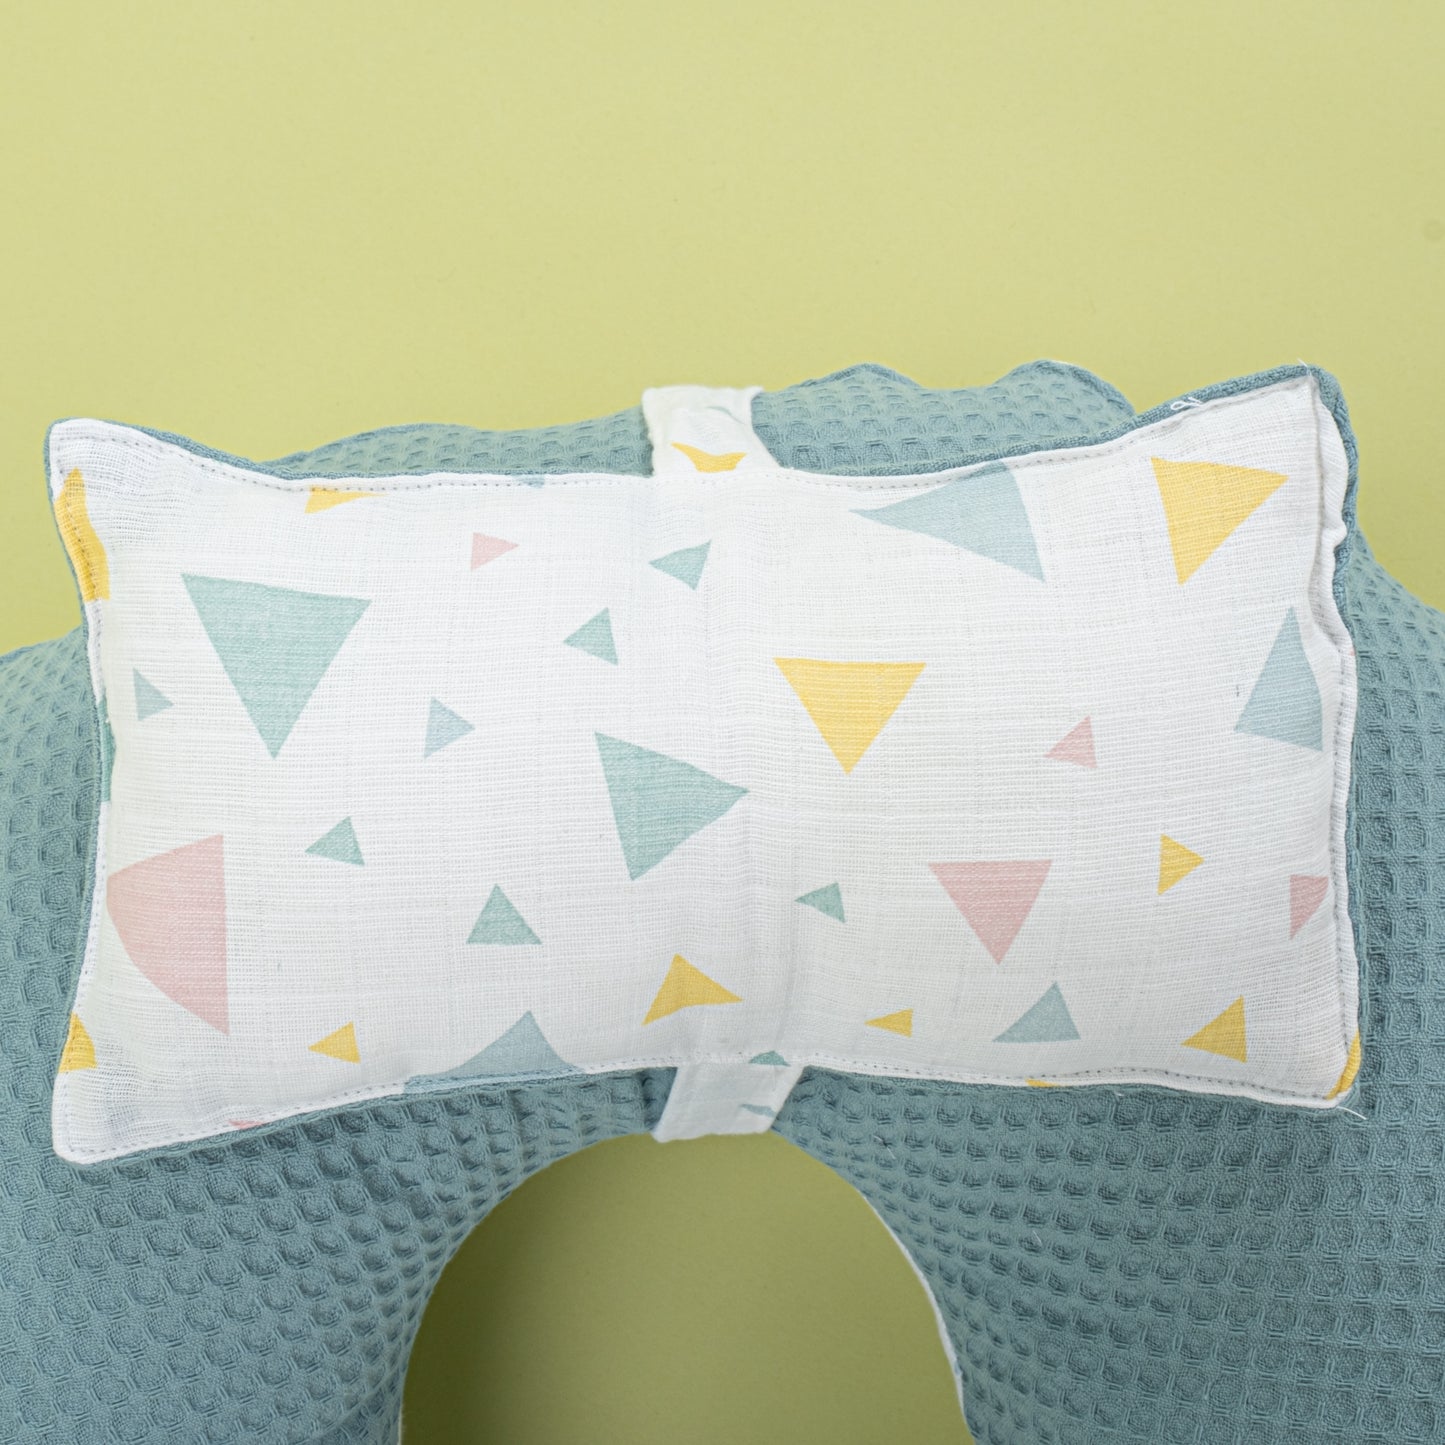 Breastfeeding Pillow - Petrol Blue Honeycomb - Colored Triangles